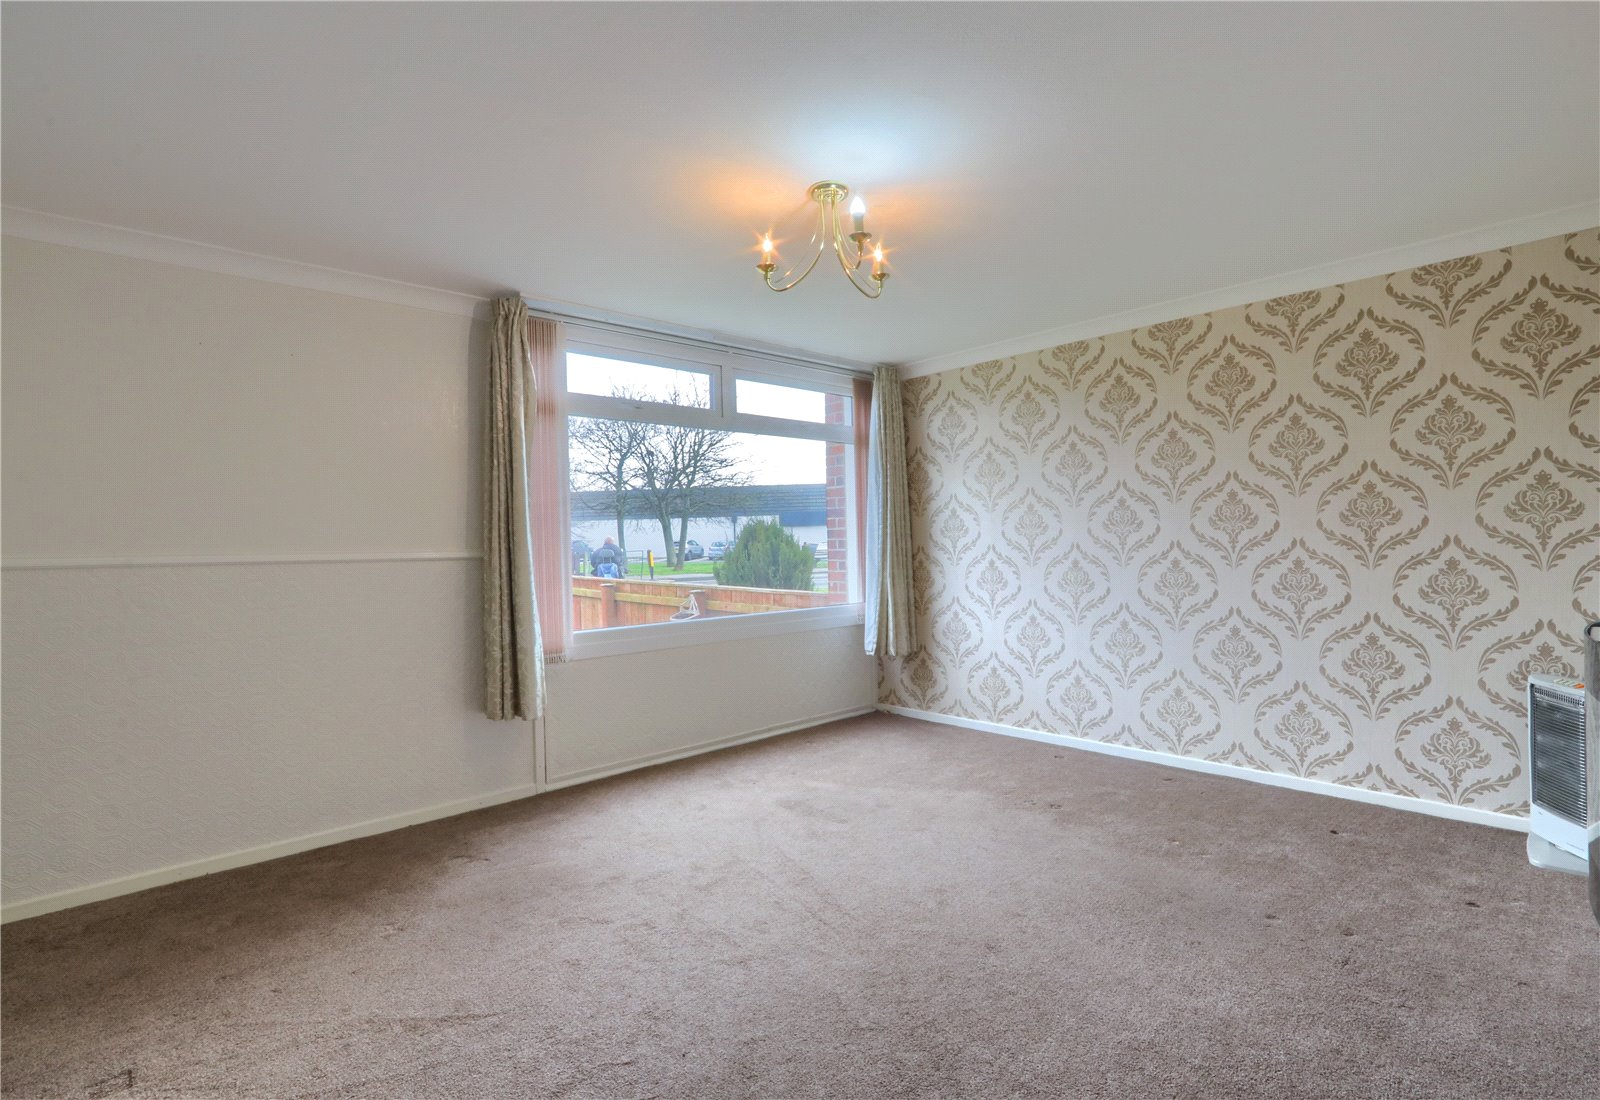 3 bed house for sale in West Dyke Road, Redcar 1